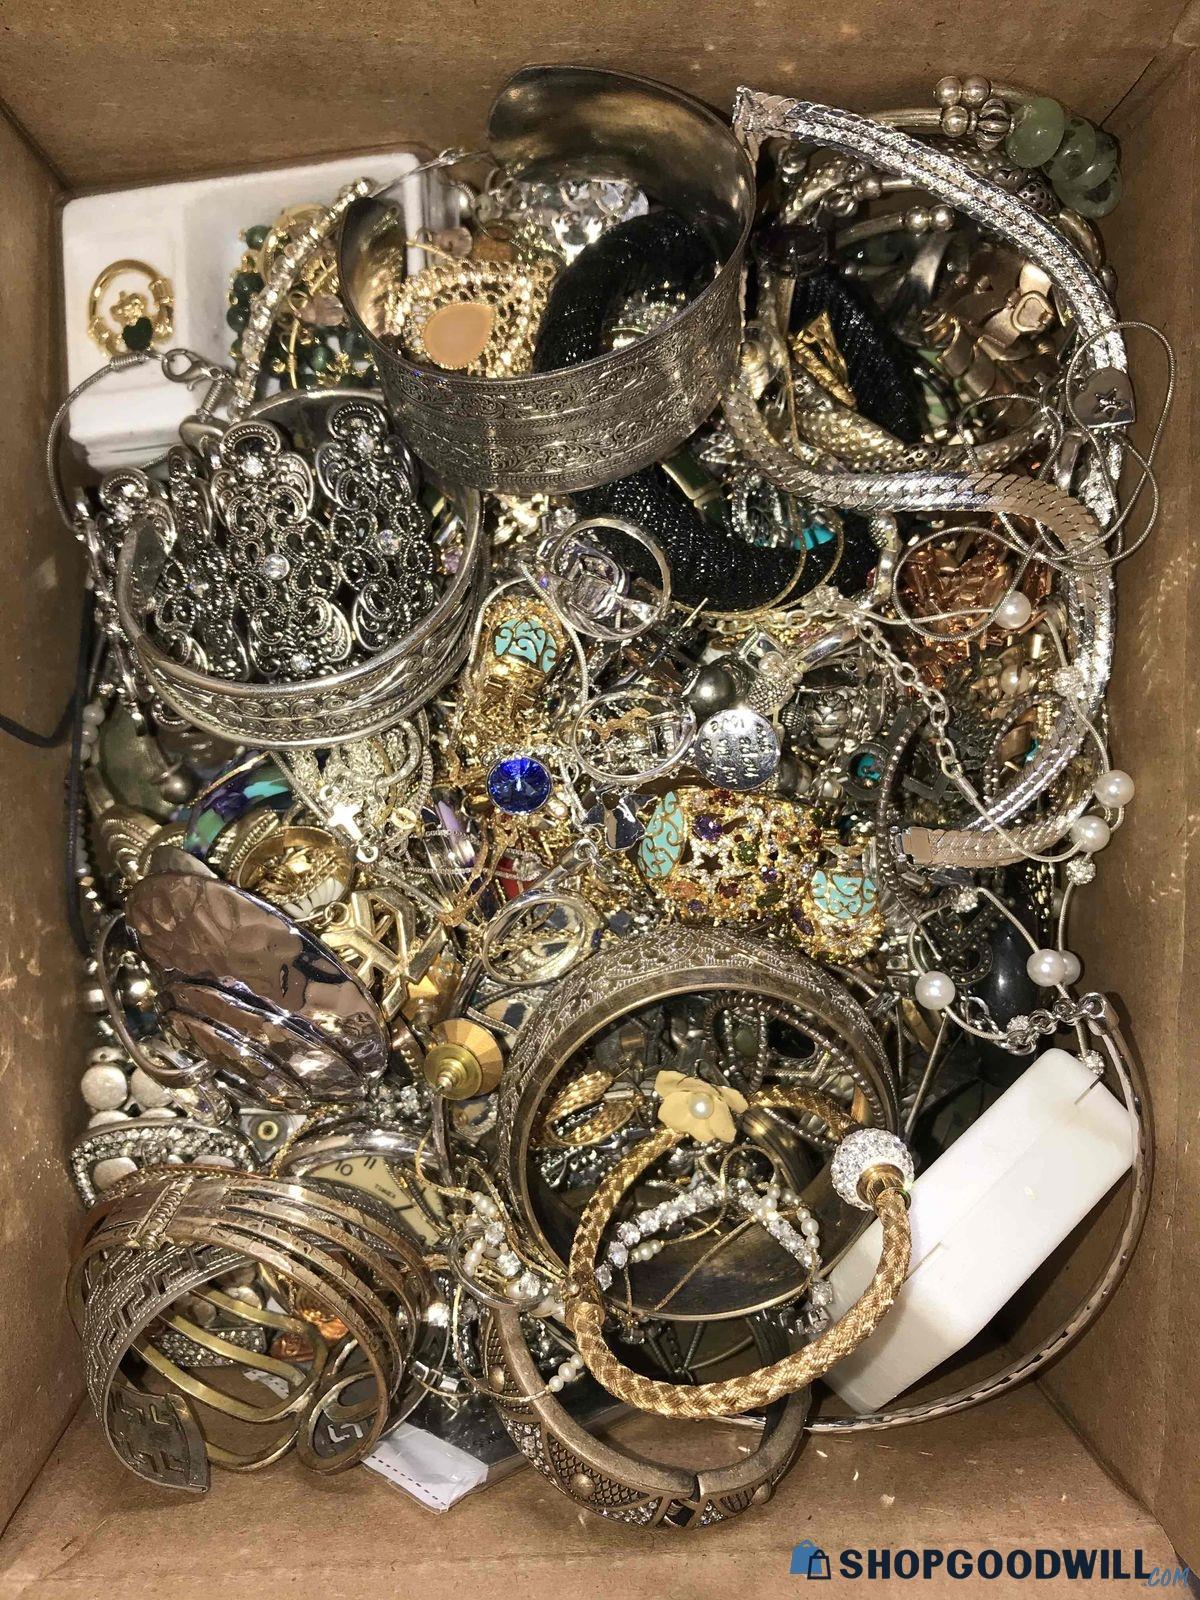 Box Lot Of Unsorted Jewelry 11Lbs. - shopgoodwill.com